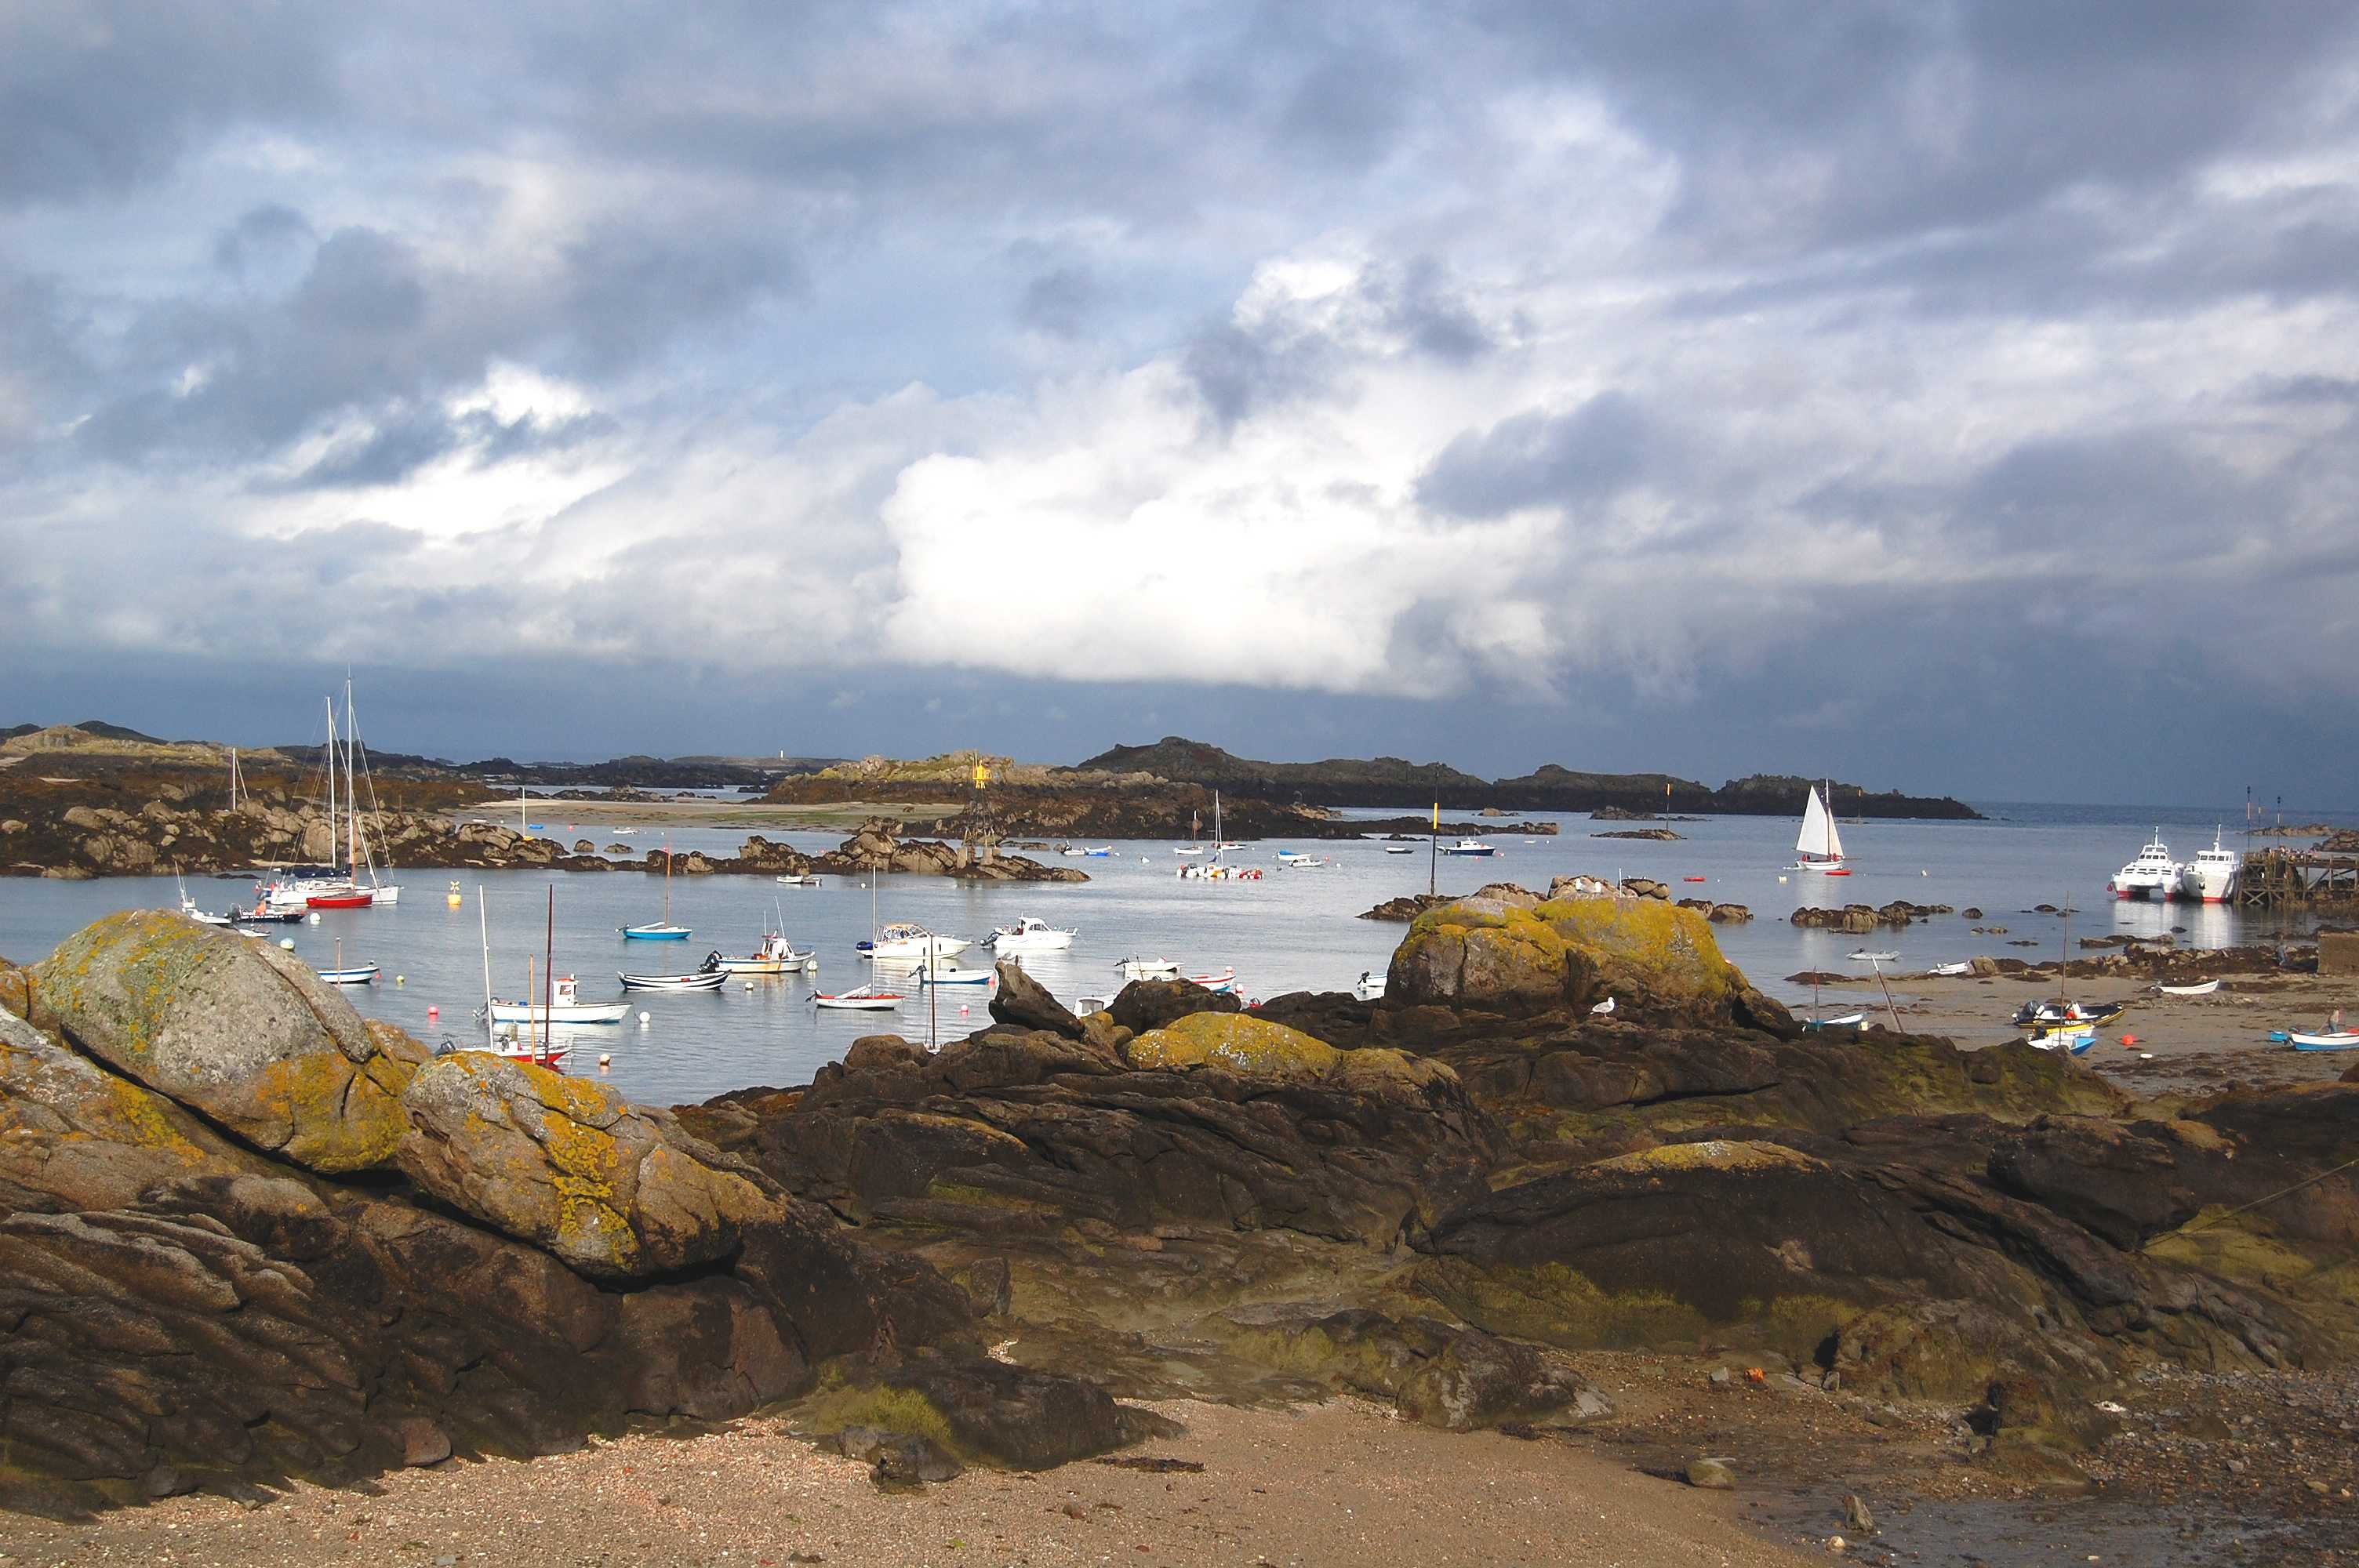 Chausey, Normandy